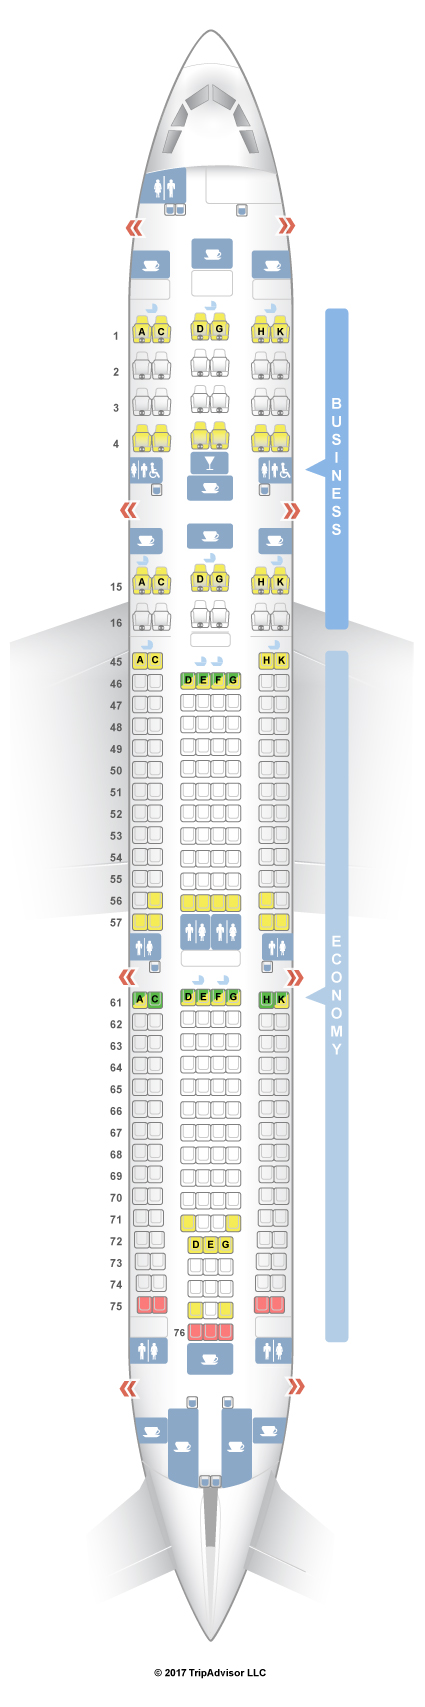 Airbus A340 600 Seating Chart South African Airways